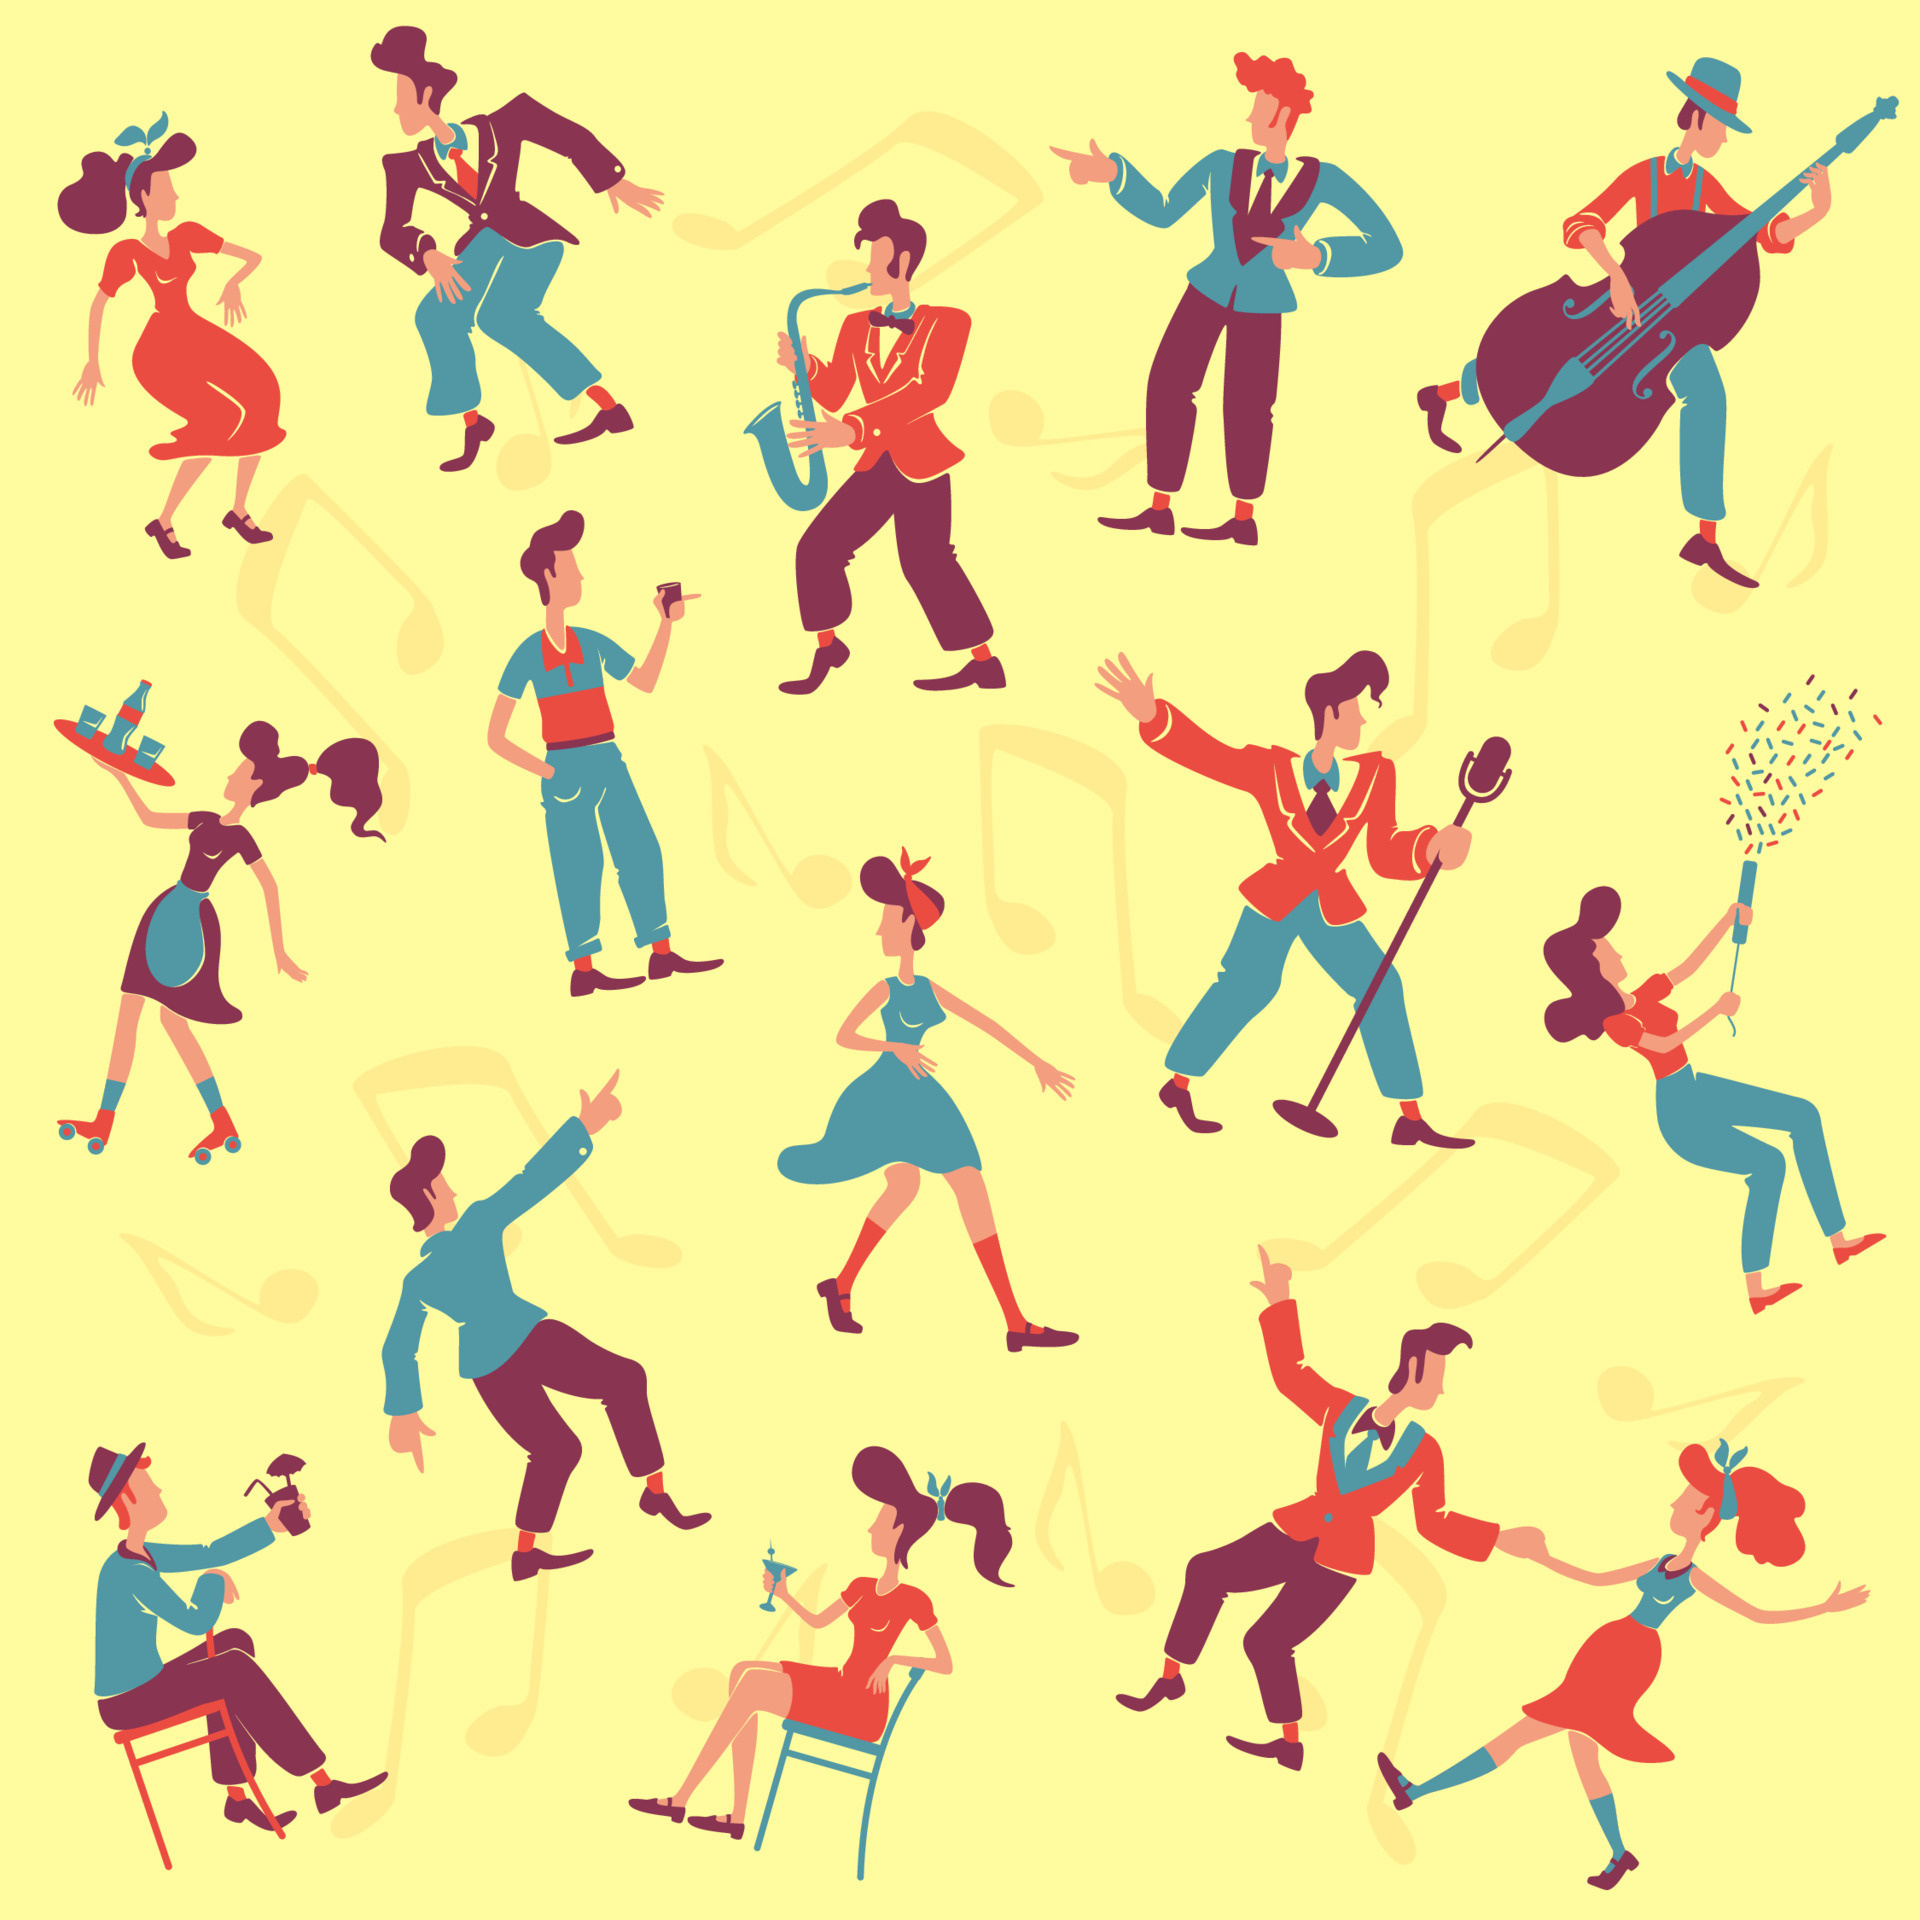 Jive: Art, Retro style party, Jazz musicians, Rock'n'roll dancers, Old fashioned, 1940s. 1920x1920 HD Wallpaper.